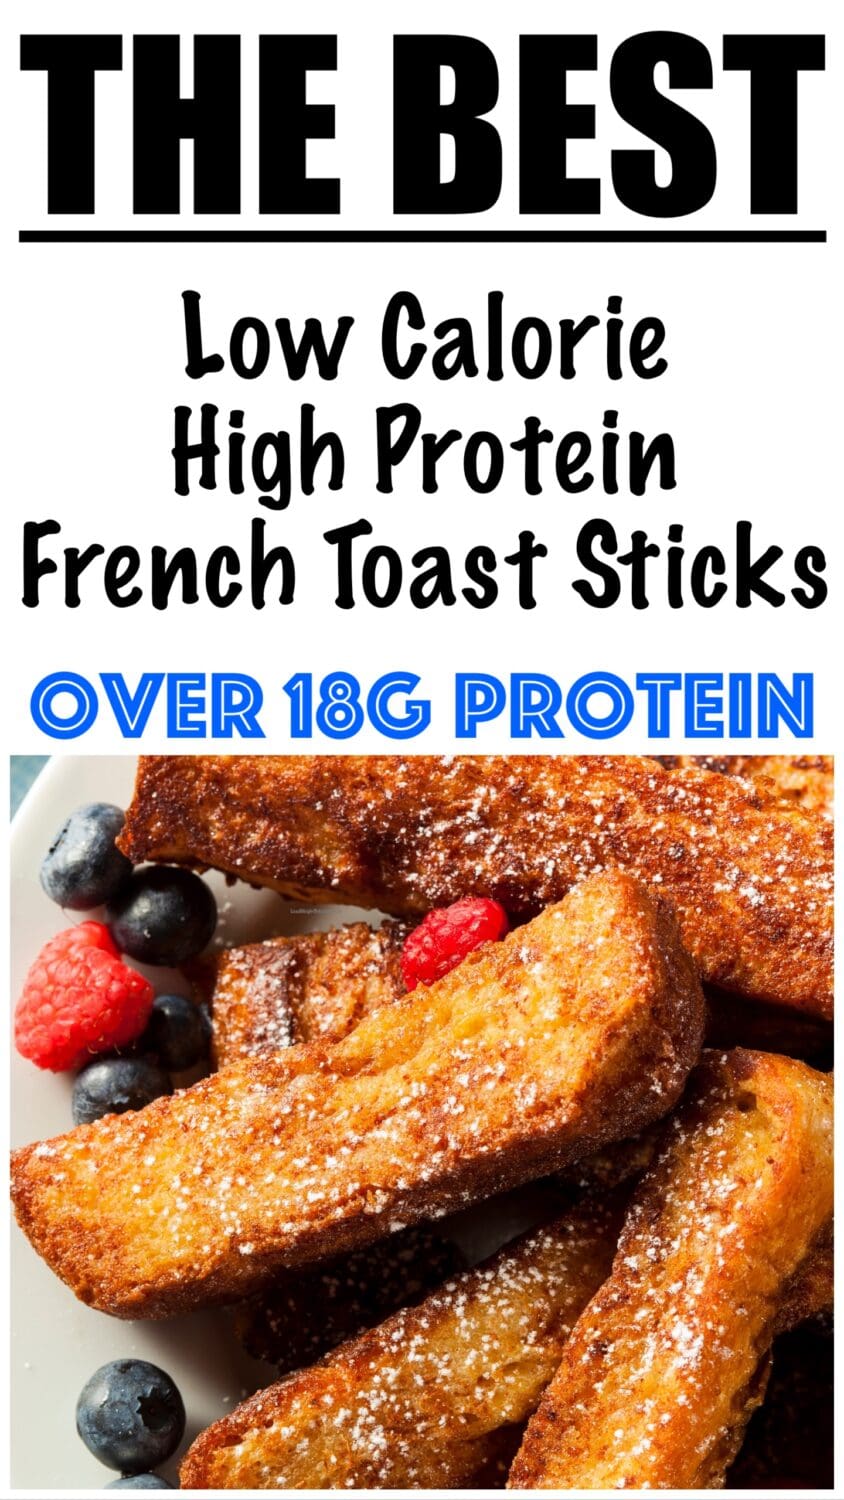 Low Calorie High Protein French Toast Sticks Recipe